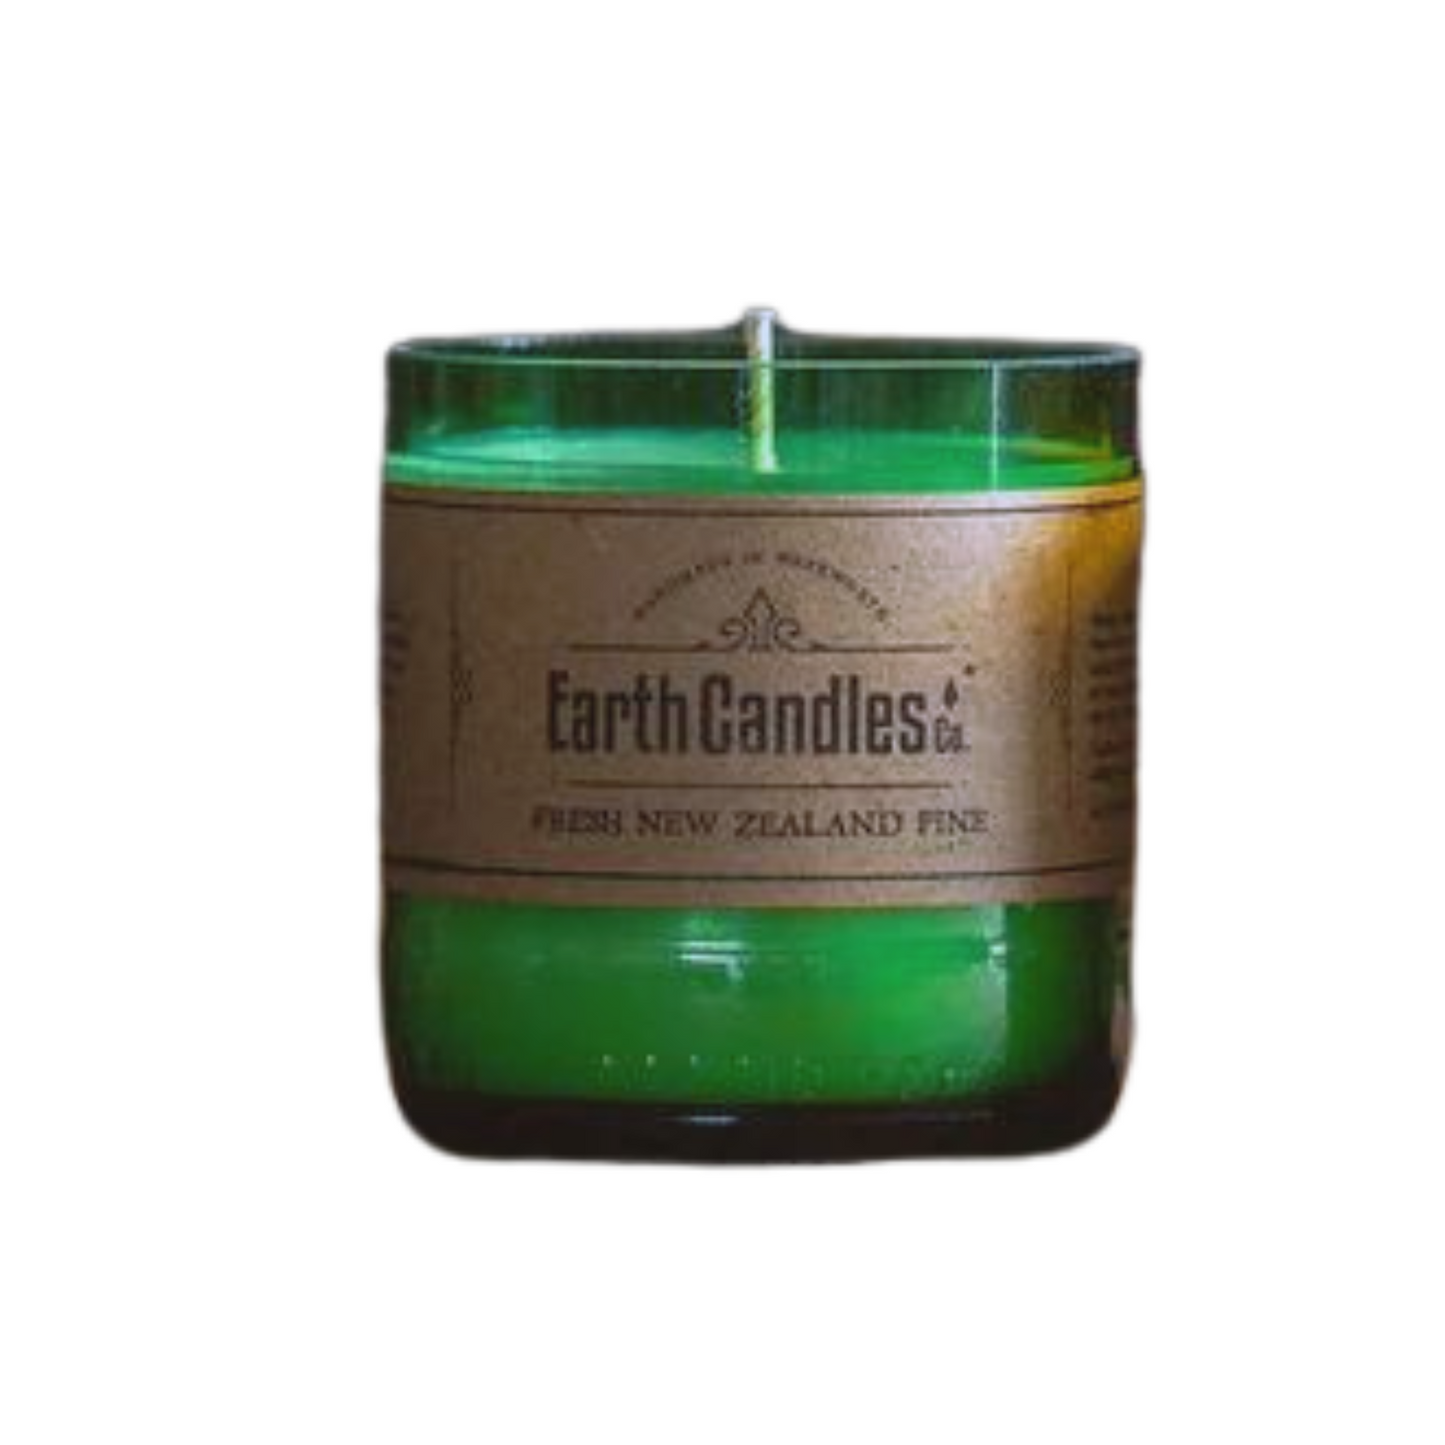 Fresh New Zealand Pine scented 100g tealight made in a recycled green glass bottle.